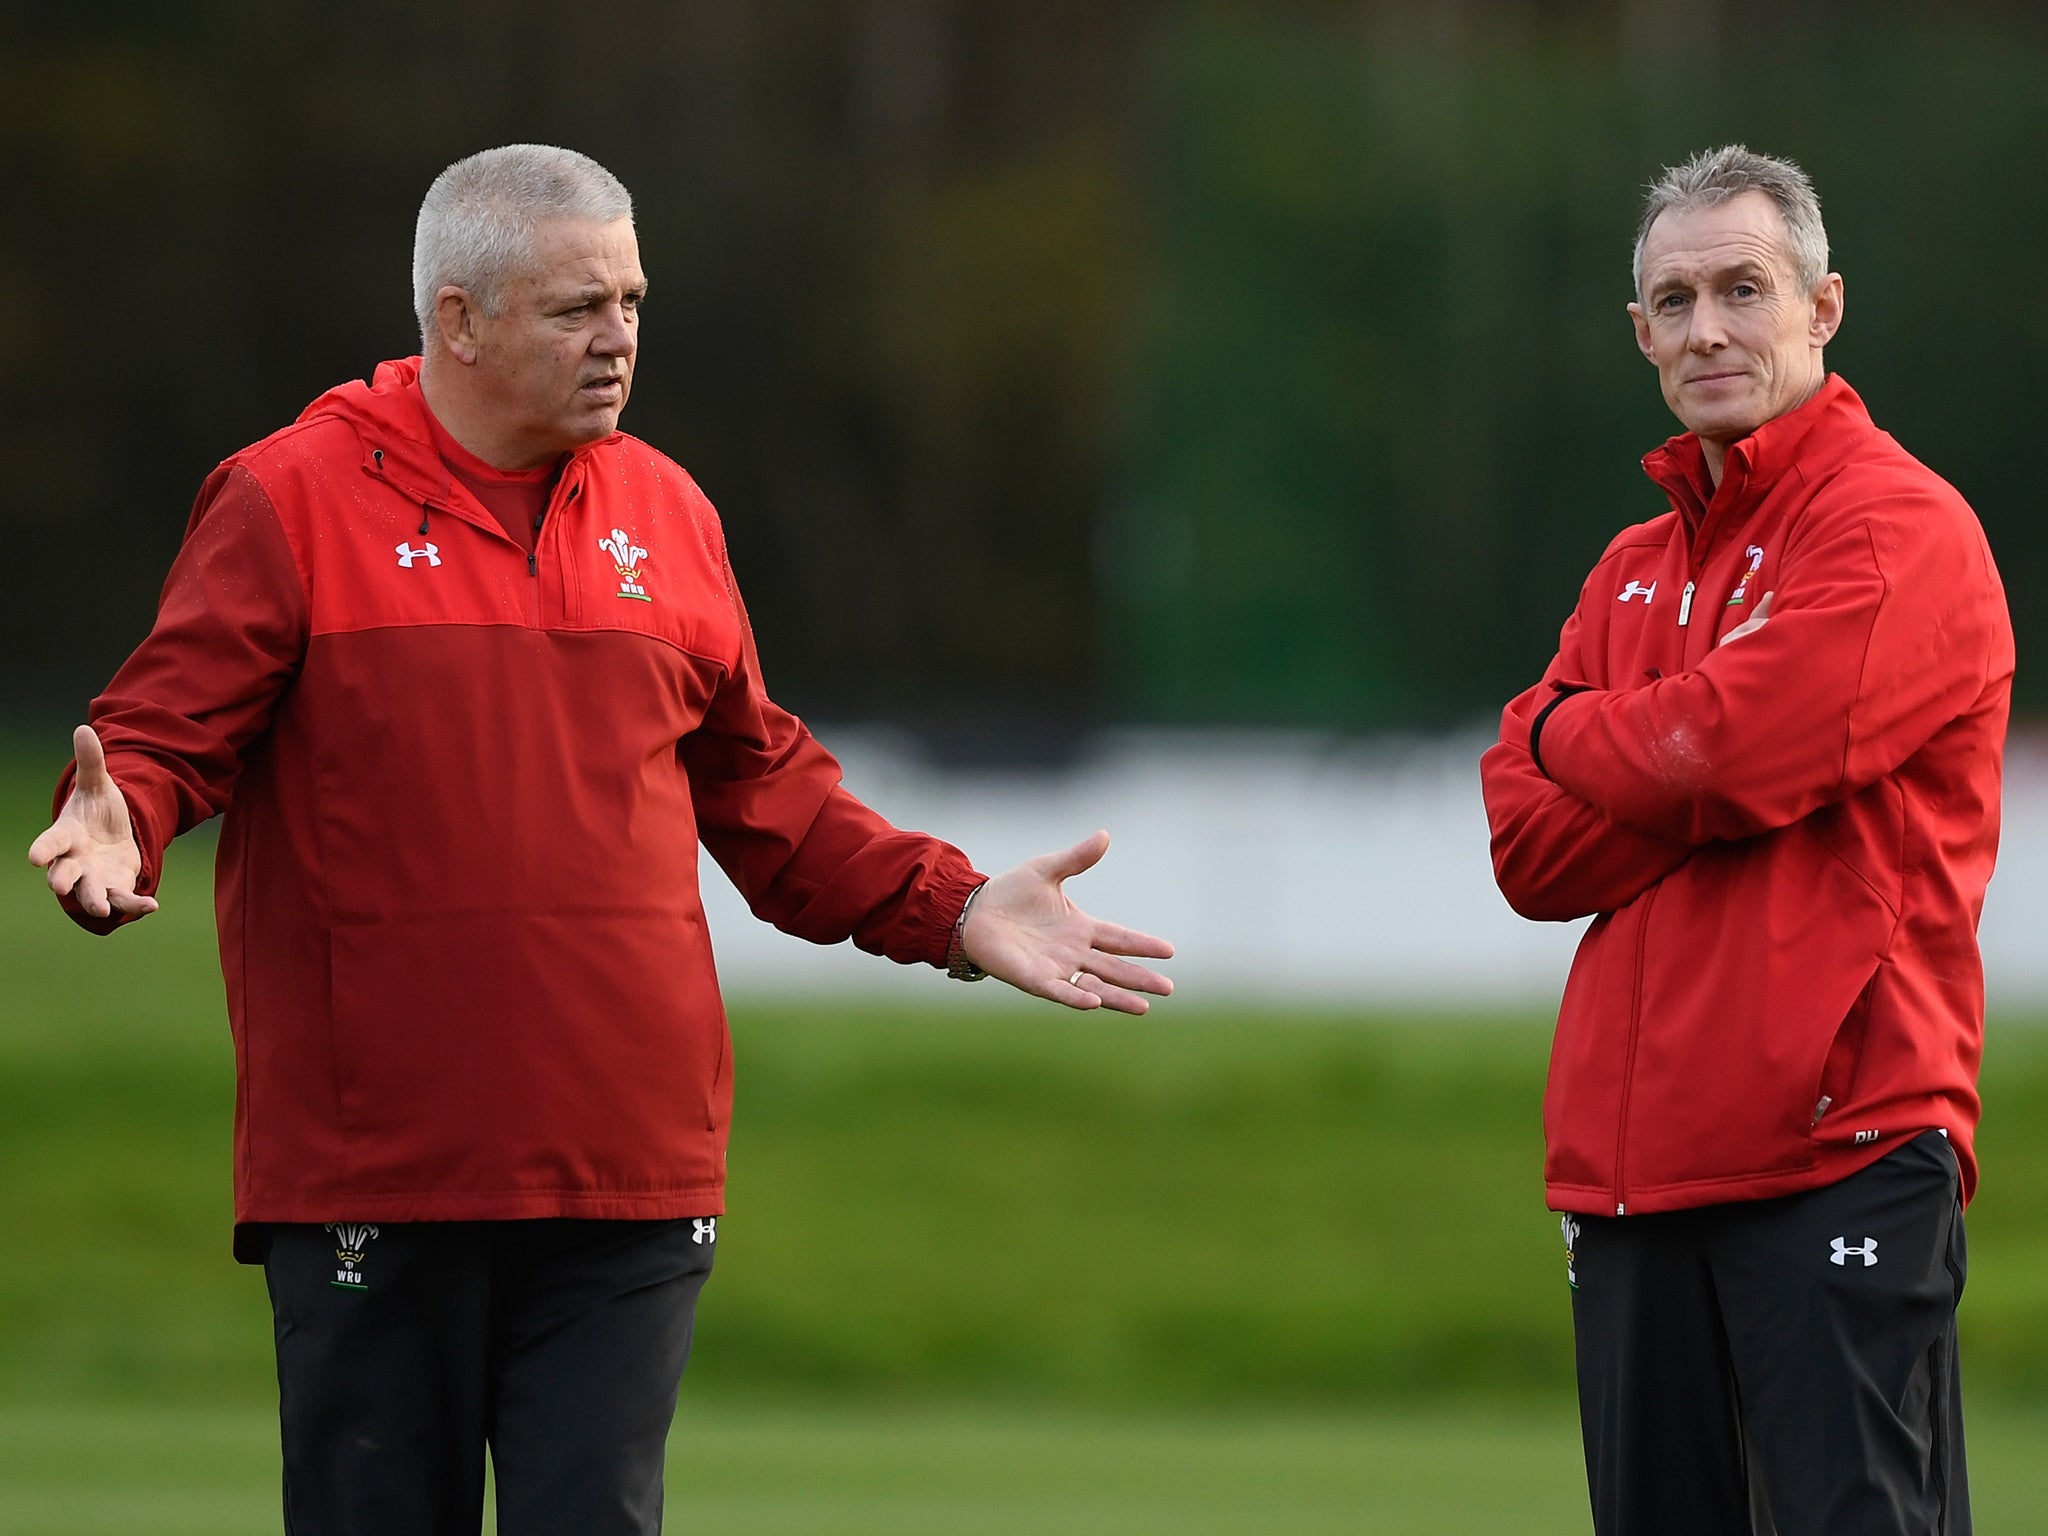 Both Gatland and Rob Howley will leave Wales in 2019